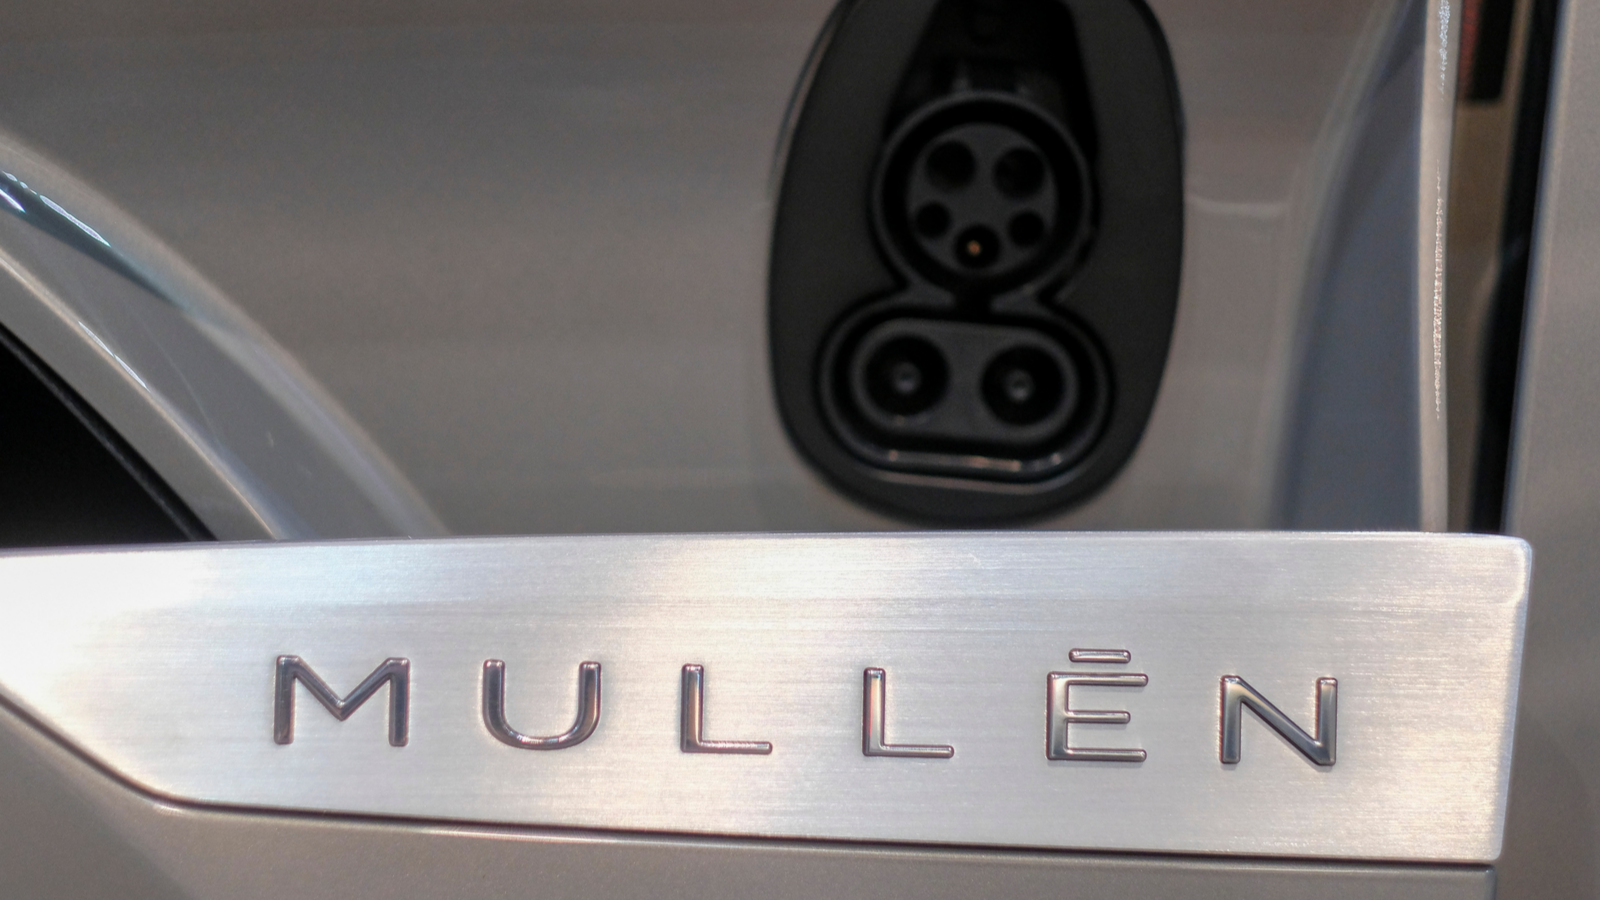 MULN Stock. The Mullen Five vehicle is displayed at the 2021 LA Auto Show media day in Los Angeles, November, 18, 2021. MULN stock.